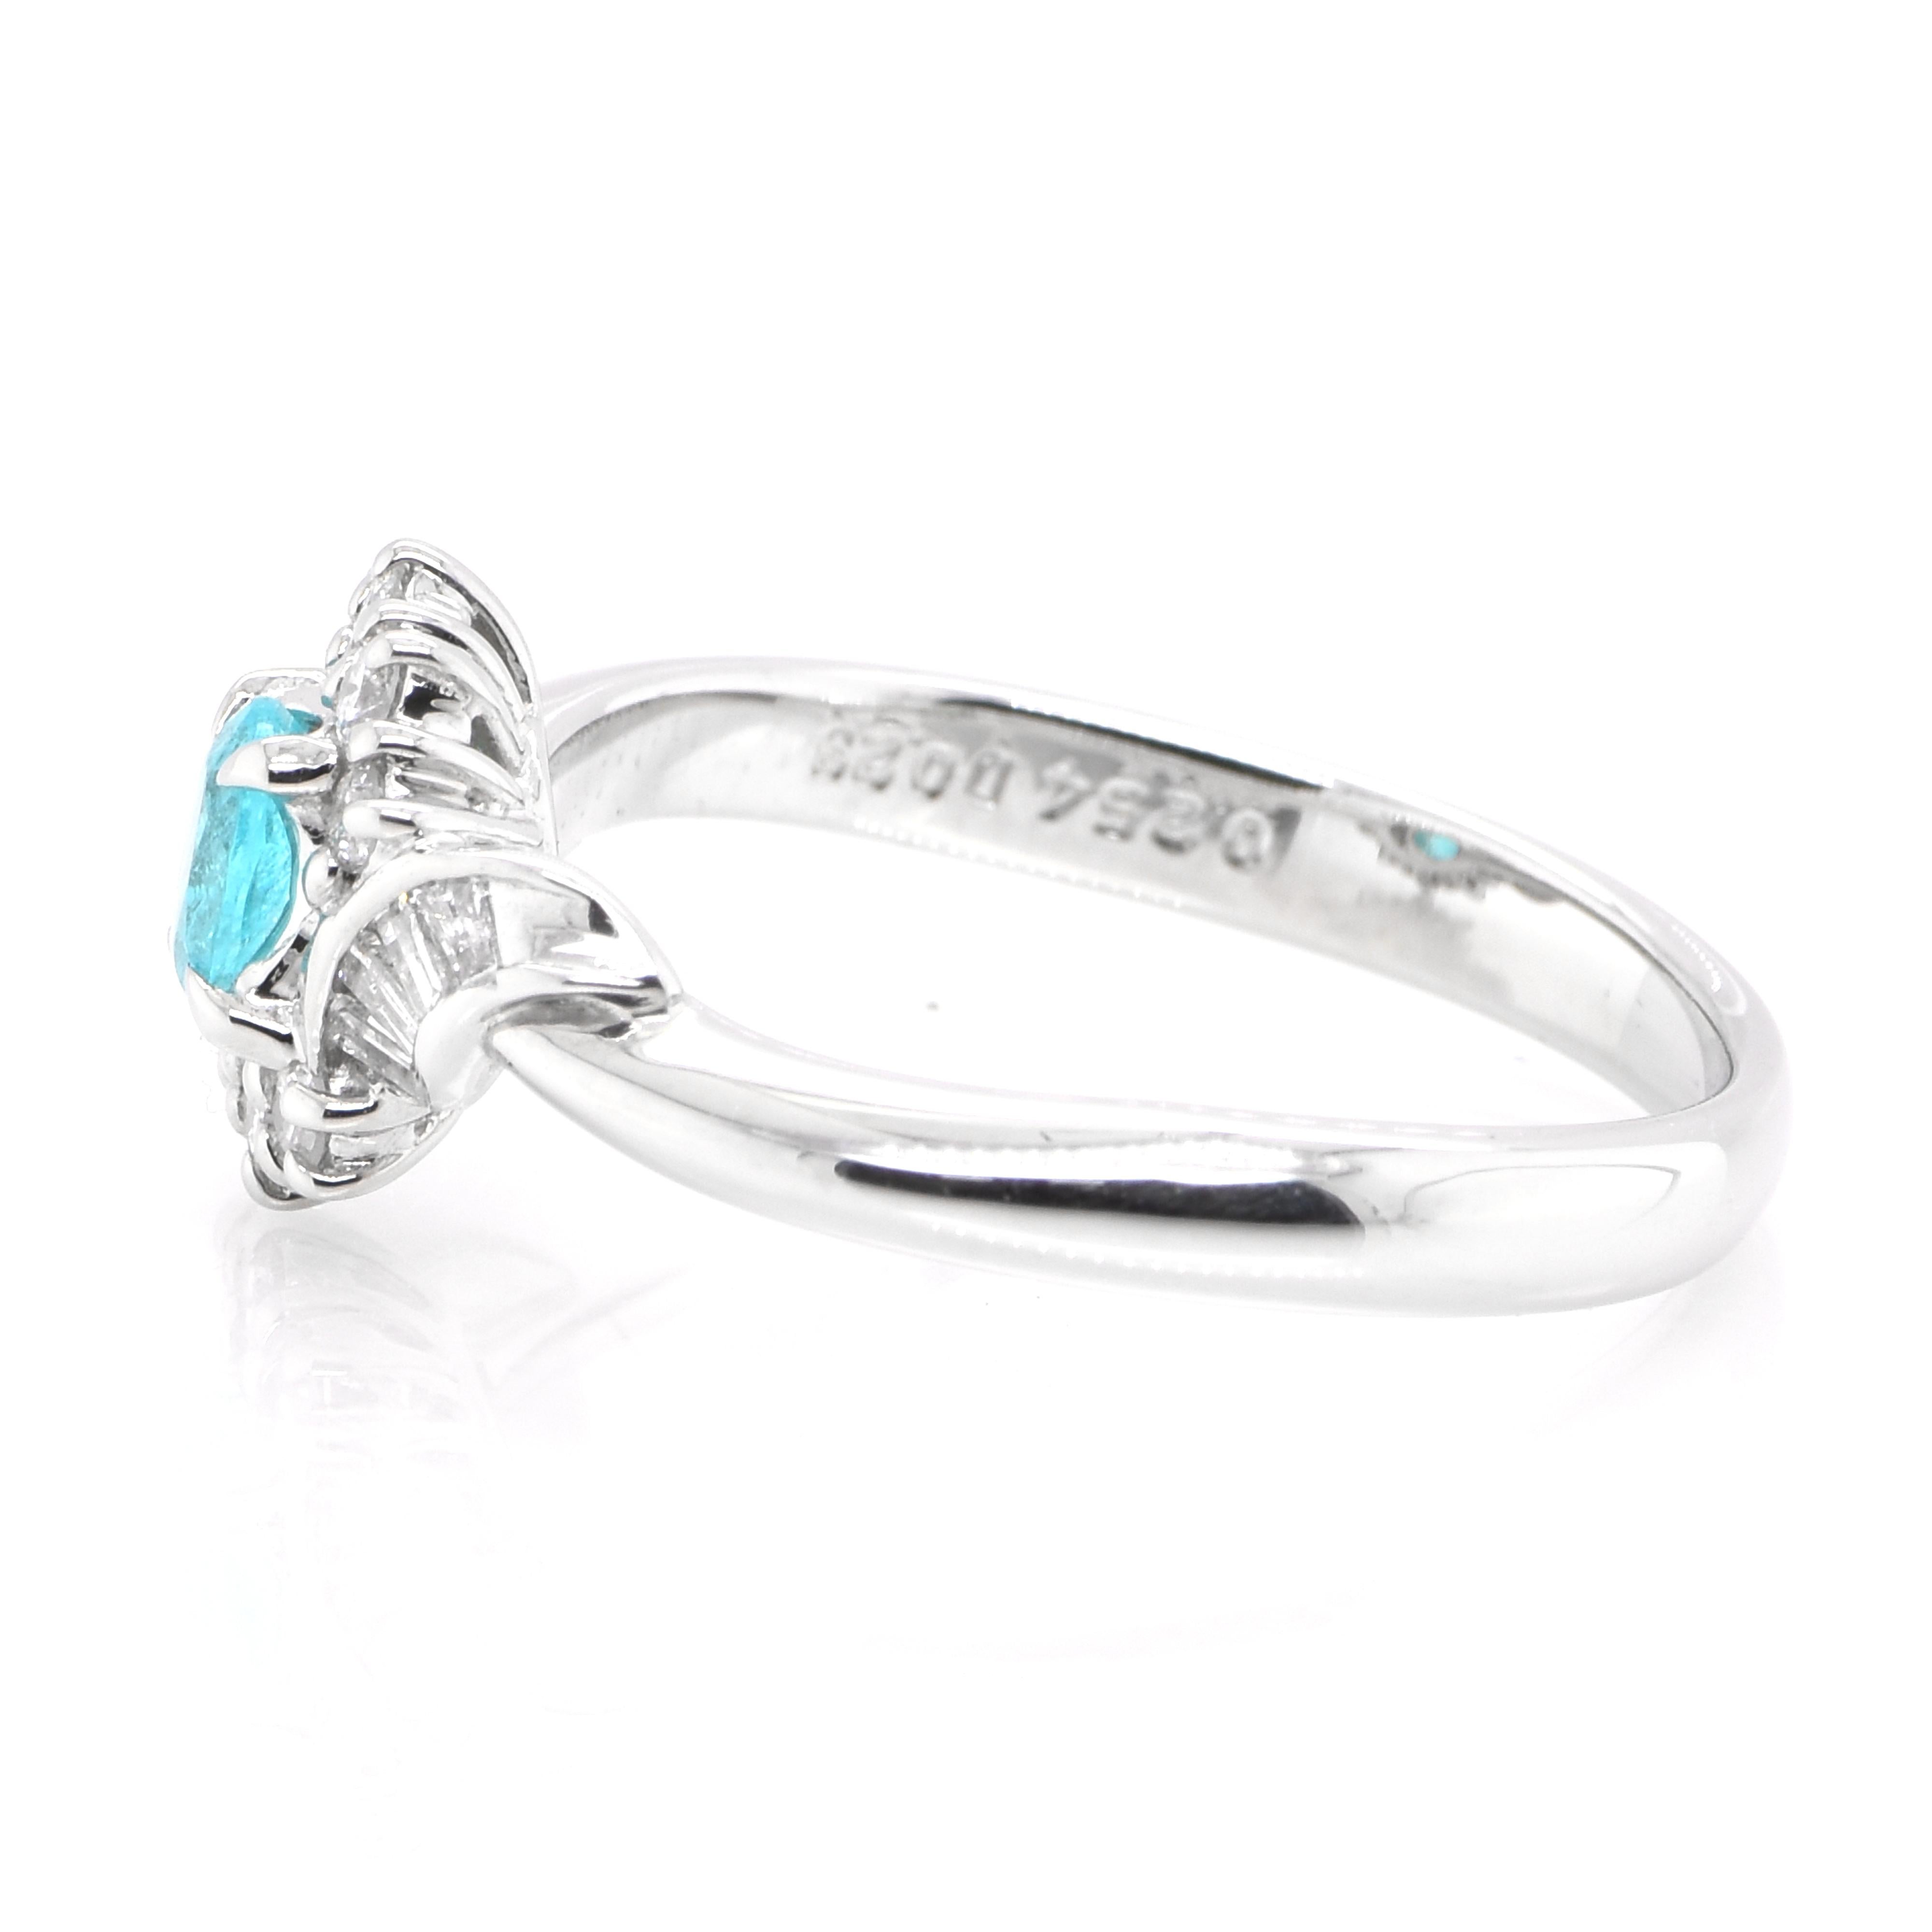 Oval Cut 0.25 Carat Natural Paraiba Tourmaline and Diamond Ring Set in Platinum For Sale